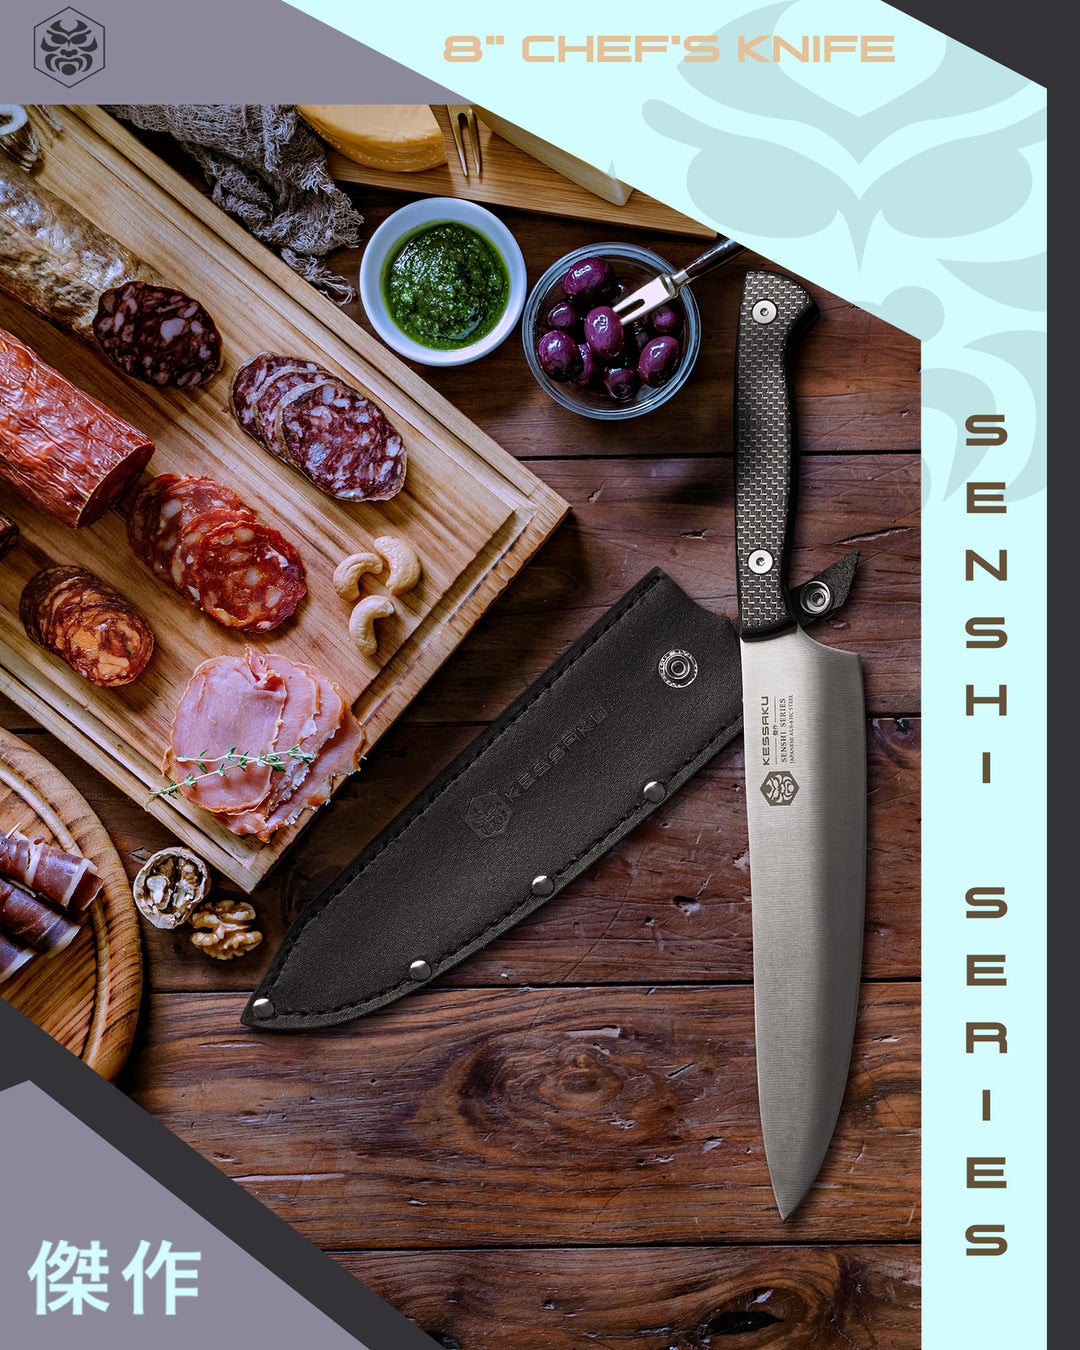 The Senshi Chef's Knife and Leather Sheath amongst cured meats, cheeses, walnuts, and olives